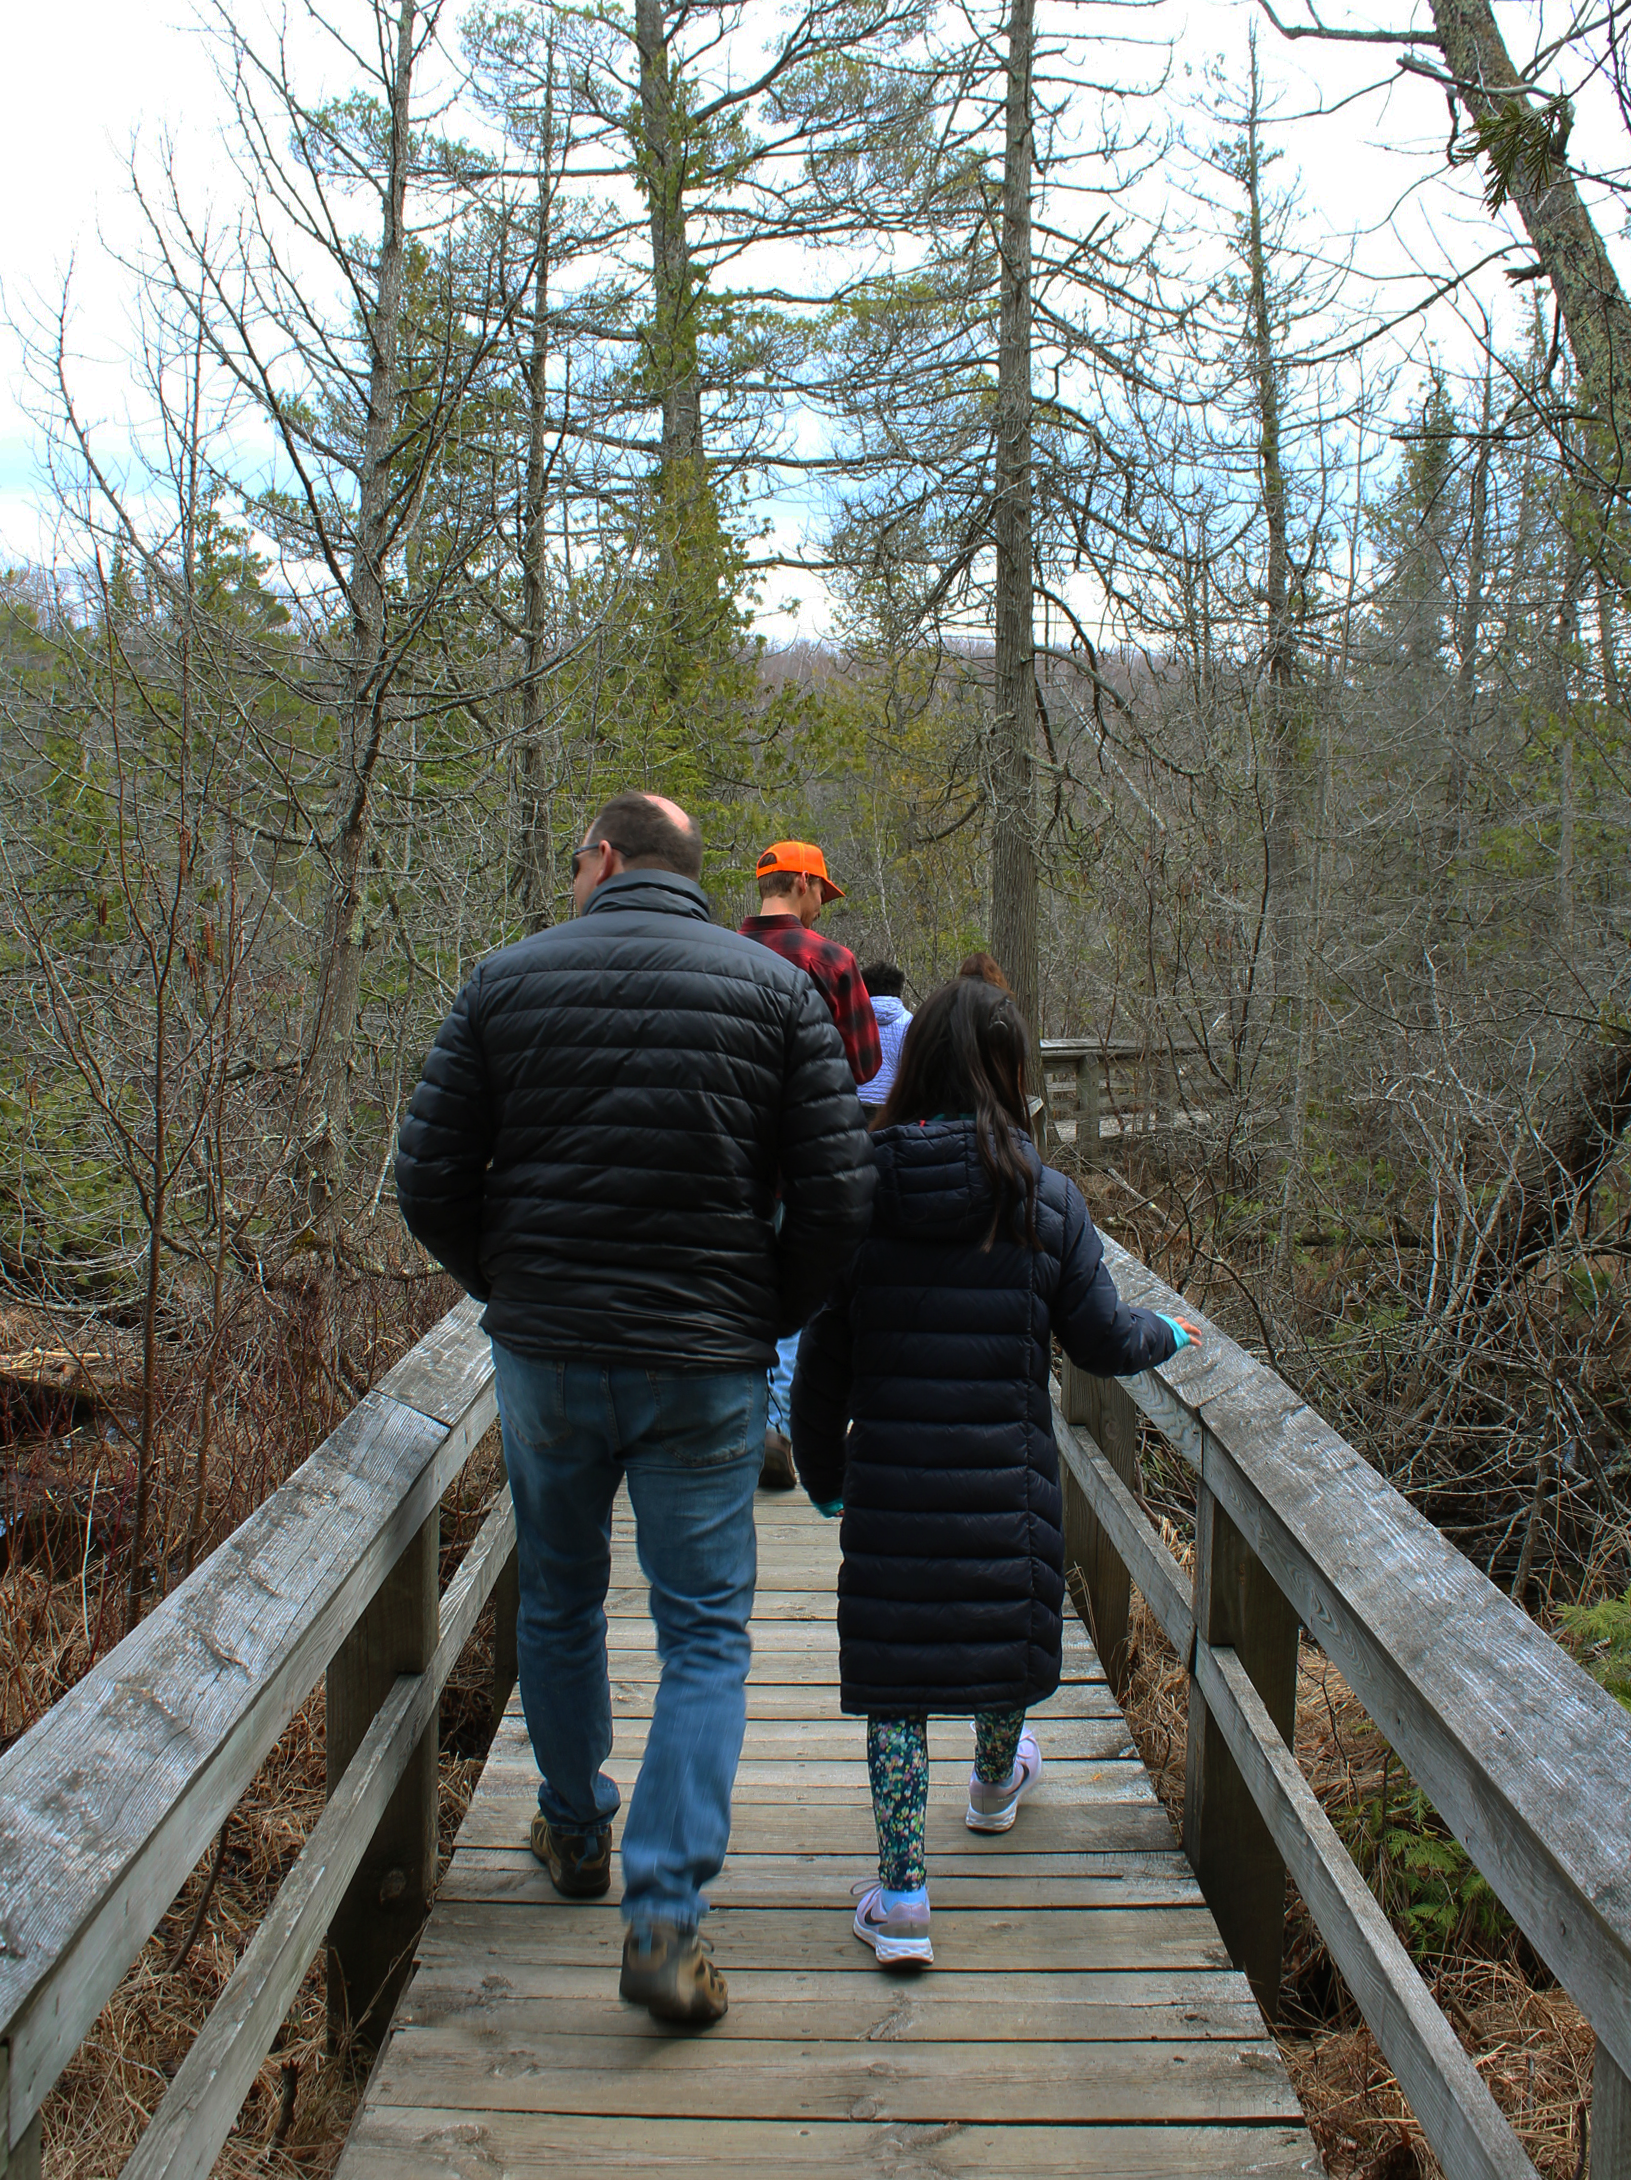 A group of people walking away from the camera on a boardwalk surrounded by cedar trees.